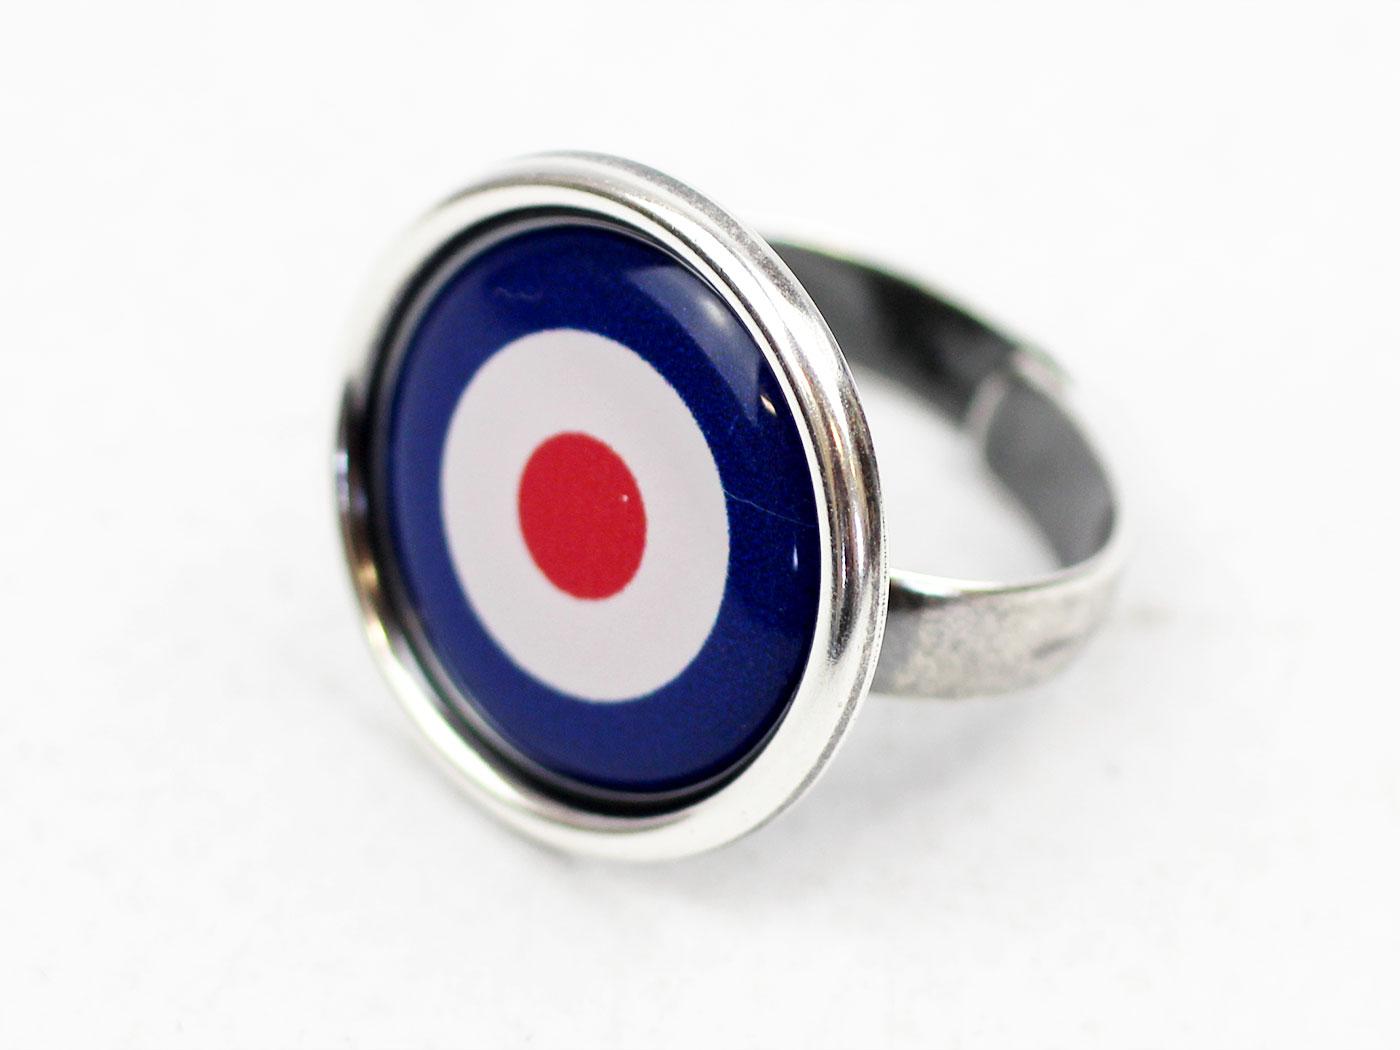 Mod Target Ring LOVE BOUTIQUE Retro 60s Ring